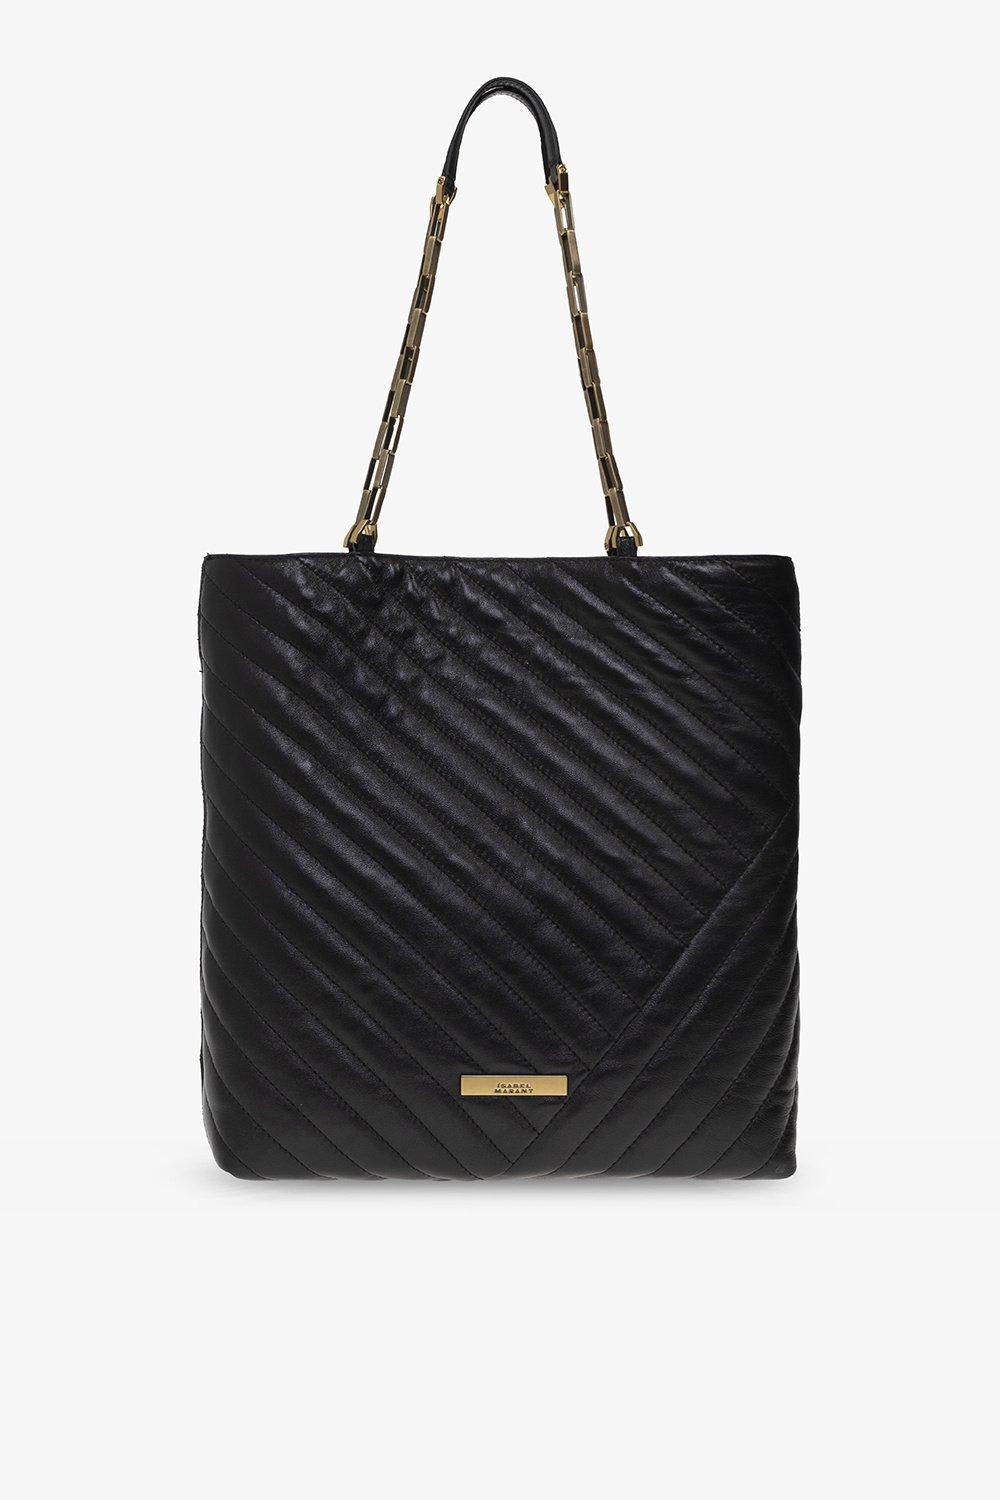 Isabel Marant Logo Plaque Quilted Tote Bag In Black/gold